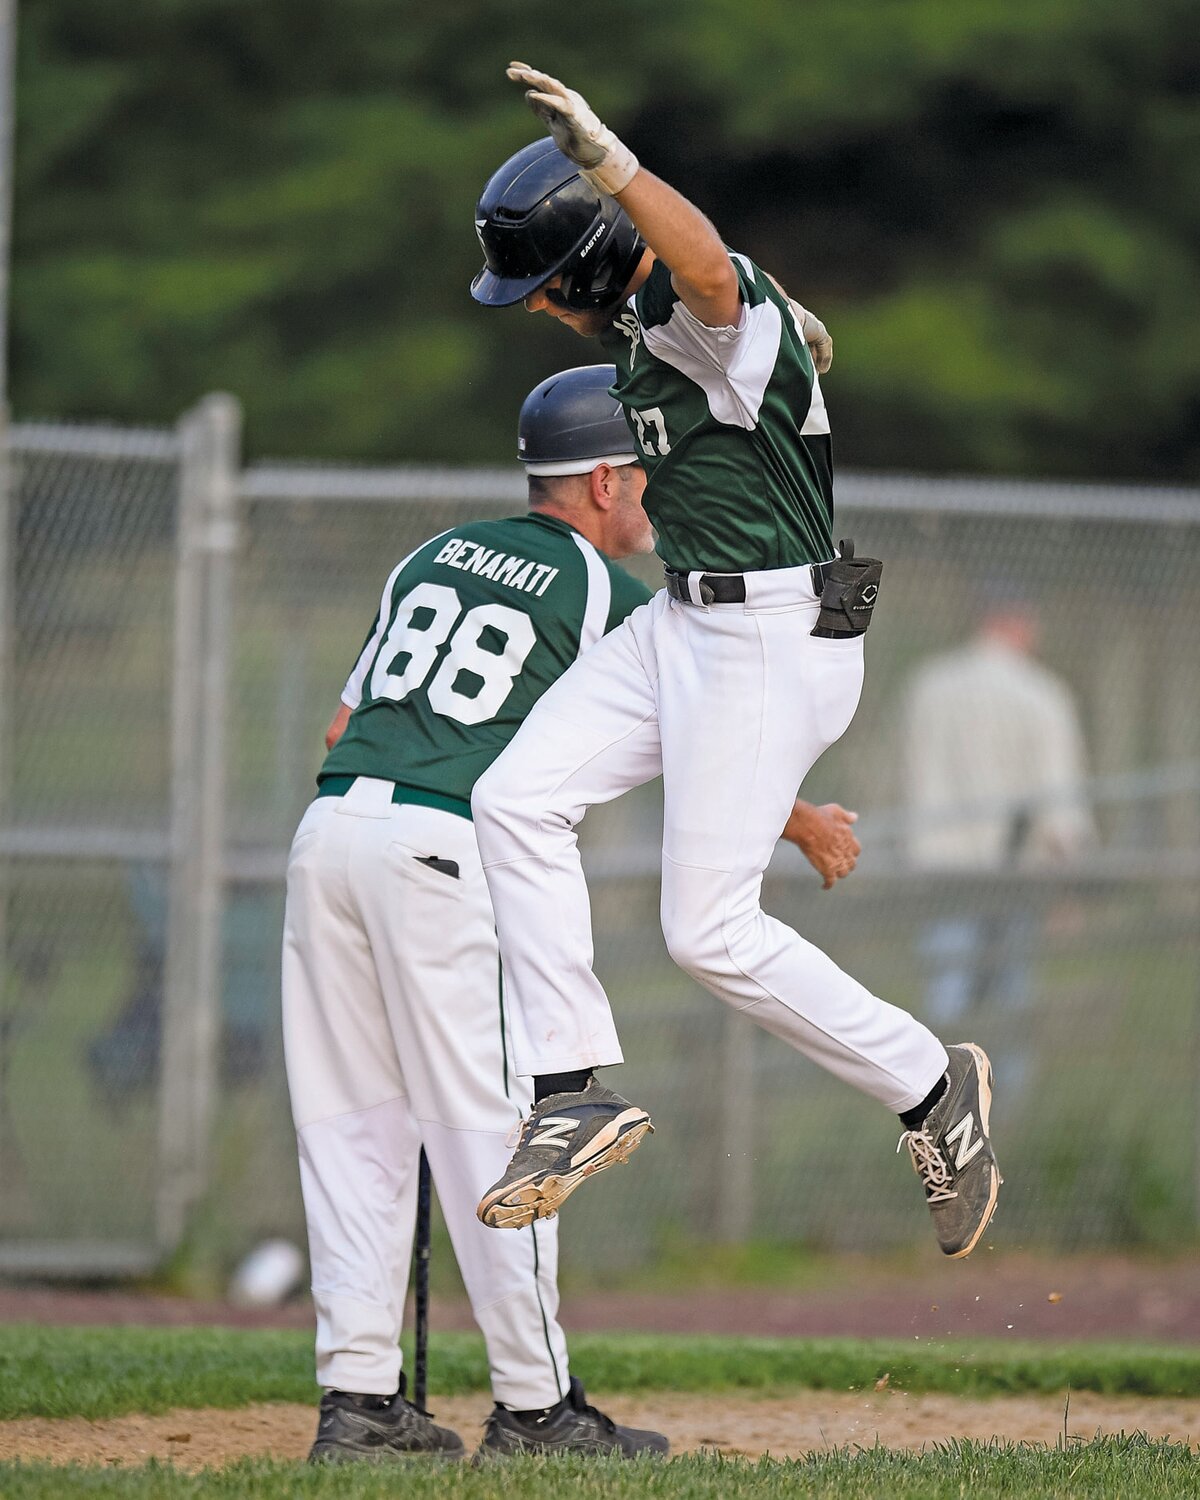 Pennridge’s Nate Lapp jumps after rounding third with his first-inning home run.